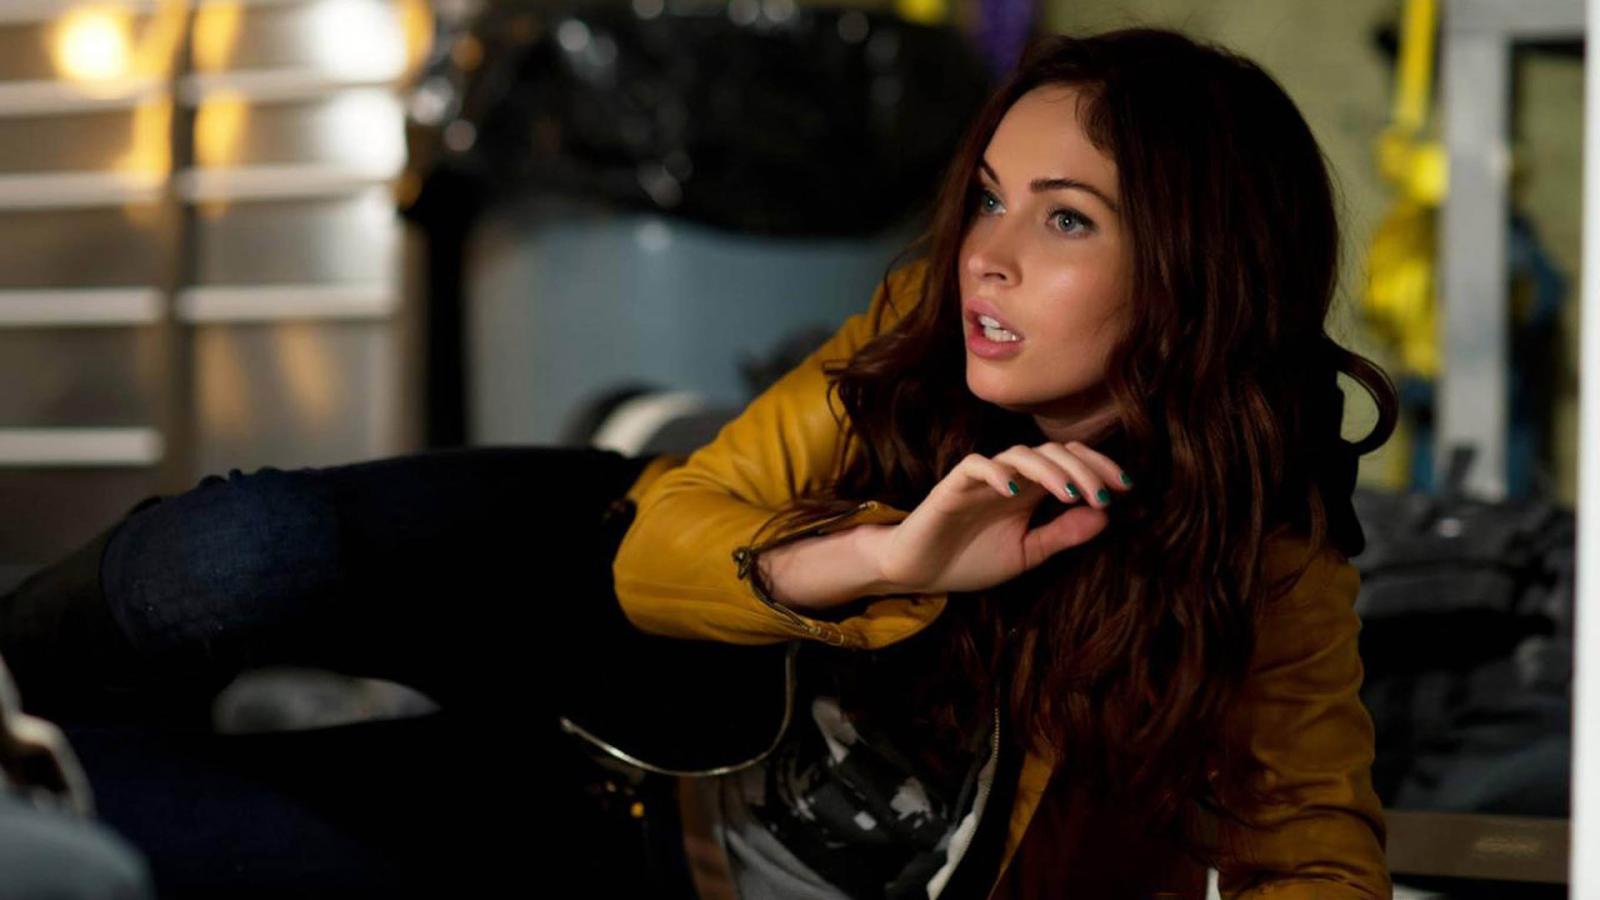 15 Underrated Megan Fox Movies That Deserve More Credit - image 6